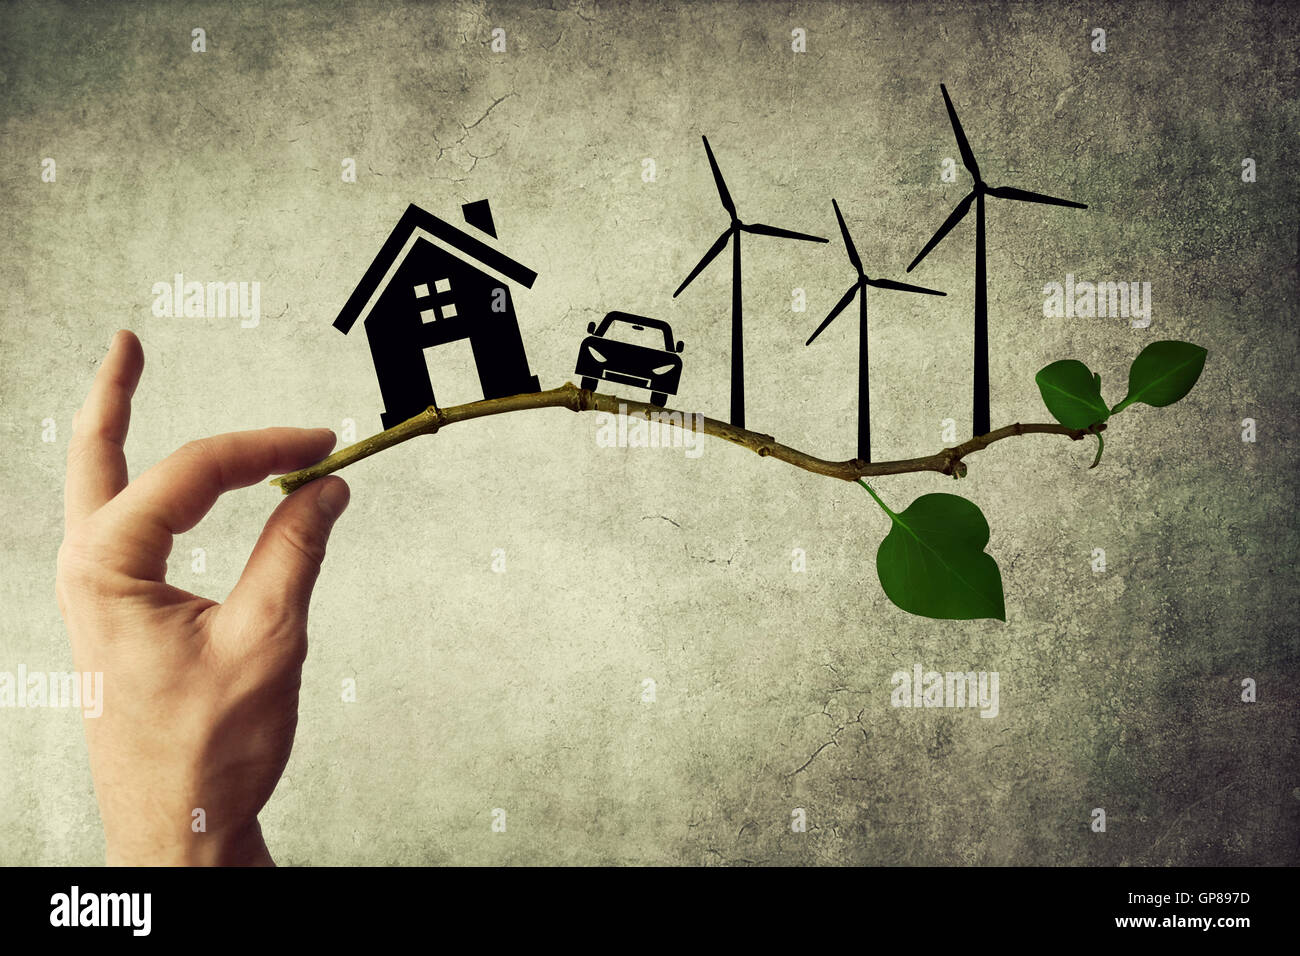 Human hand holding a tree branch. Environmental green energy concept. Silhouette of house, car and wind turbine Stock Photo